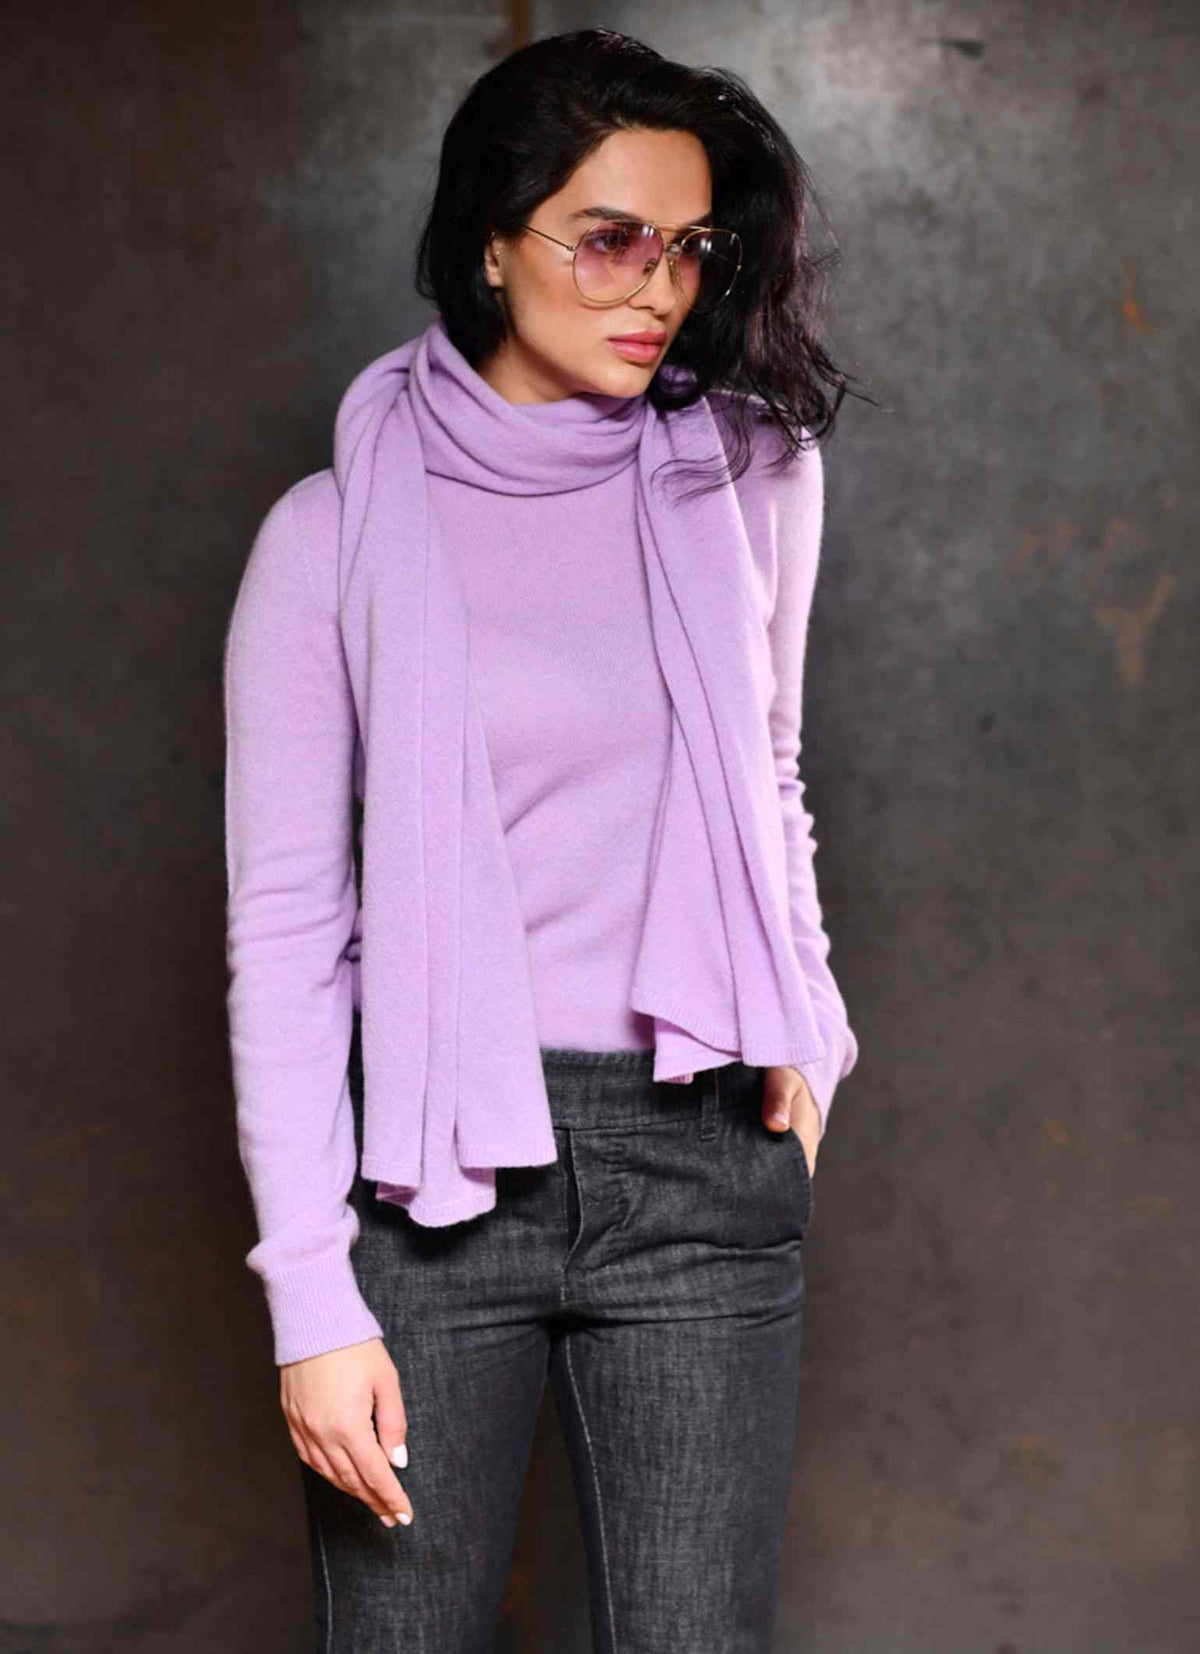 Cervinia cashmere scarf in color violet paired with matching cashmere